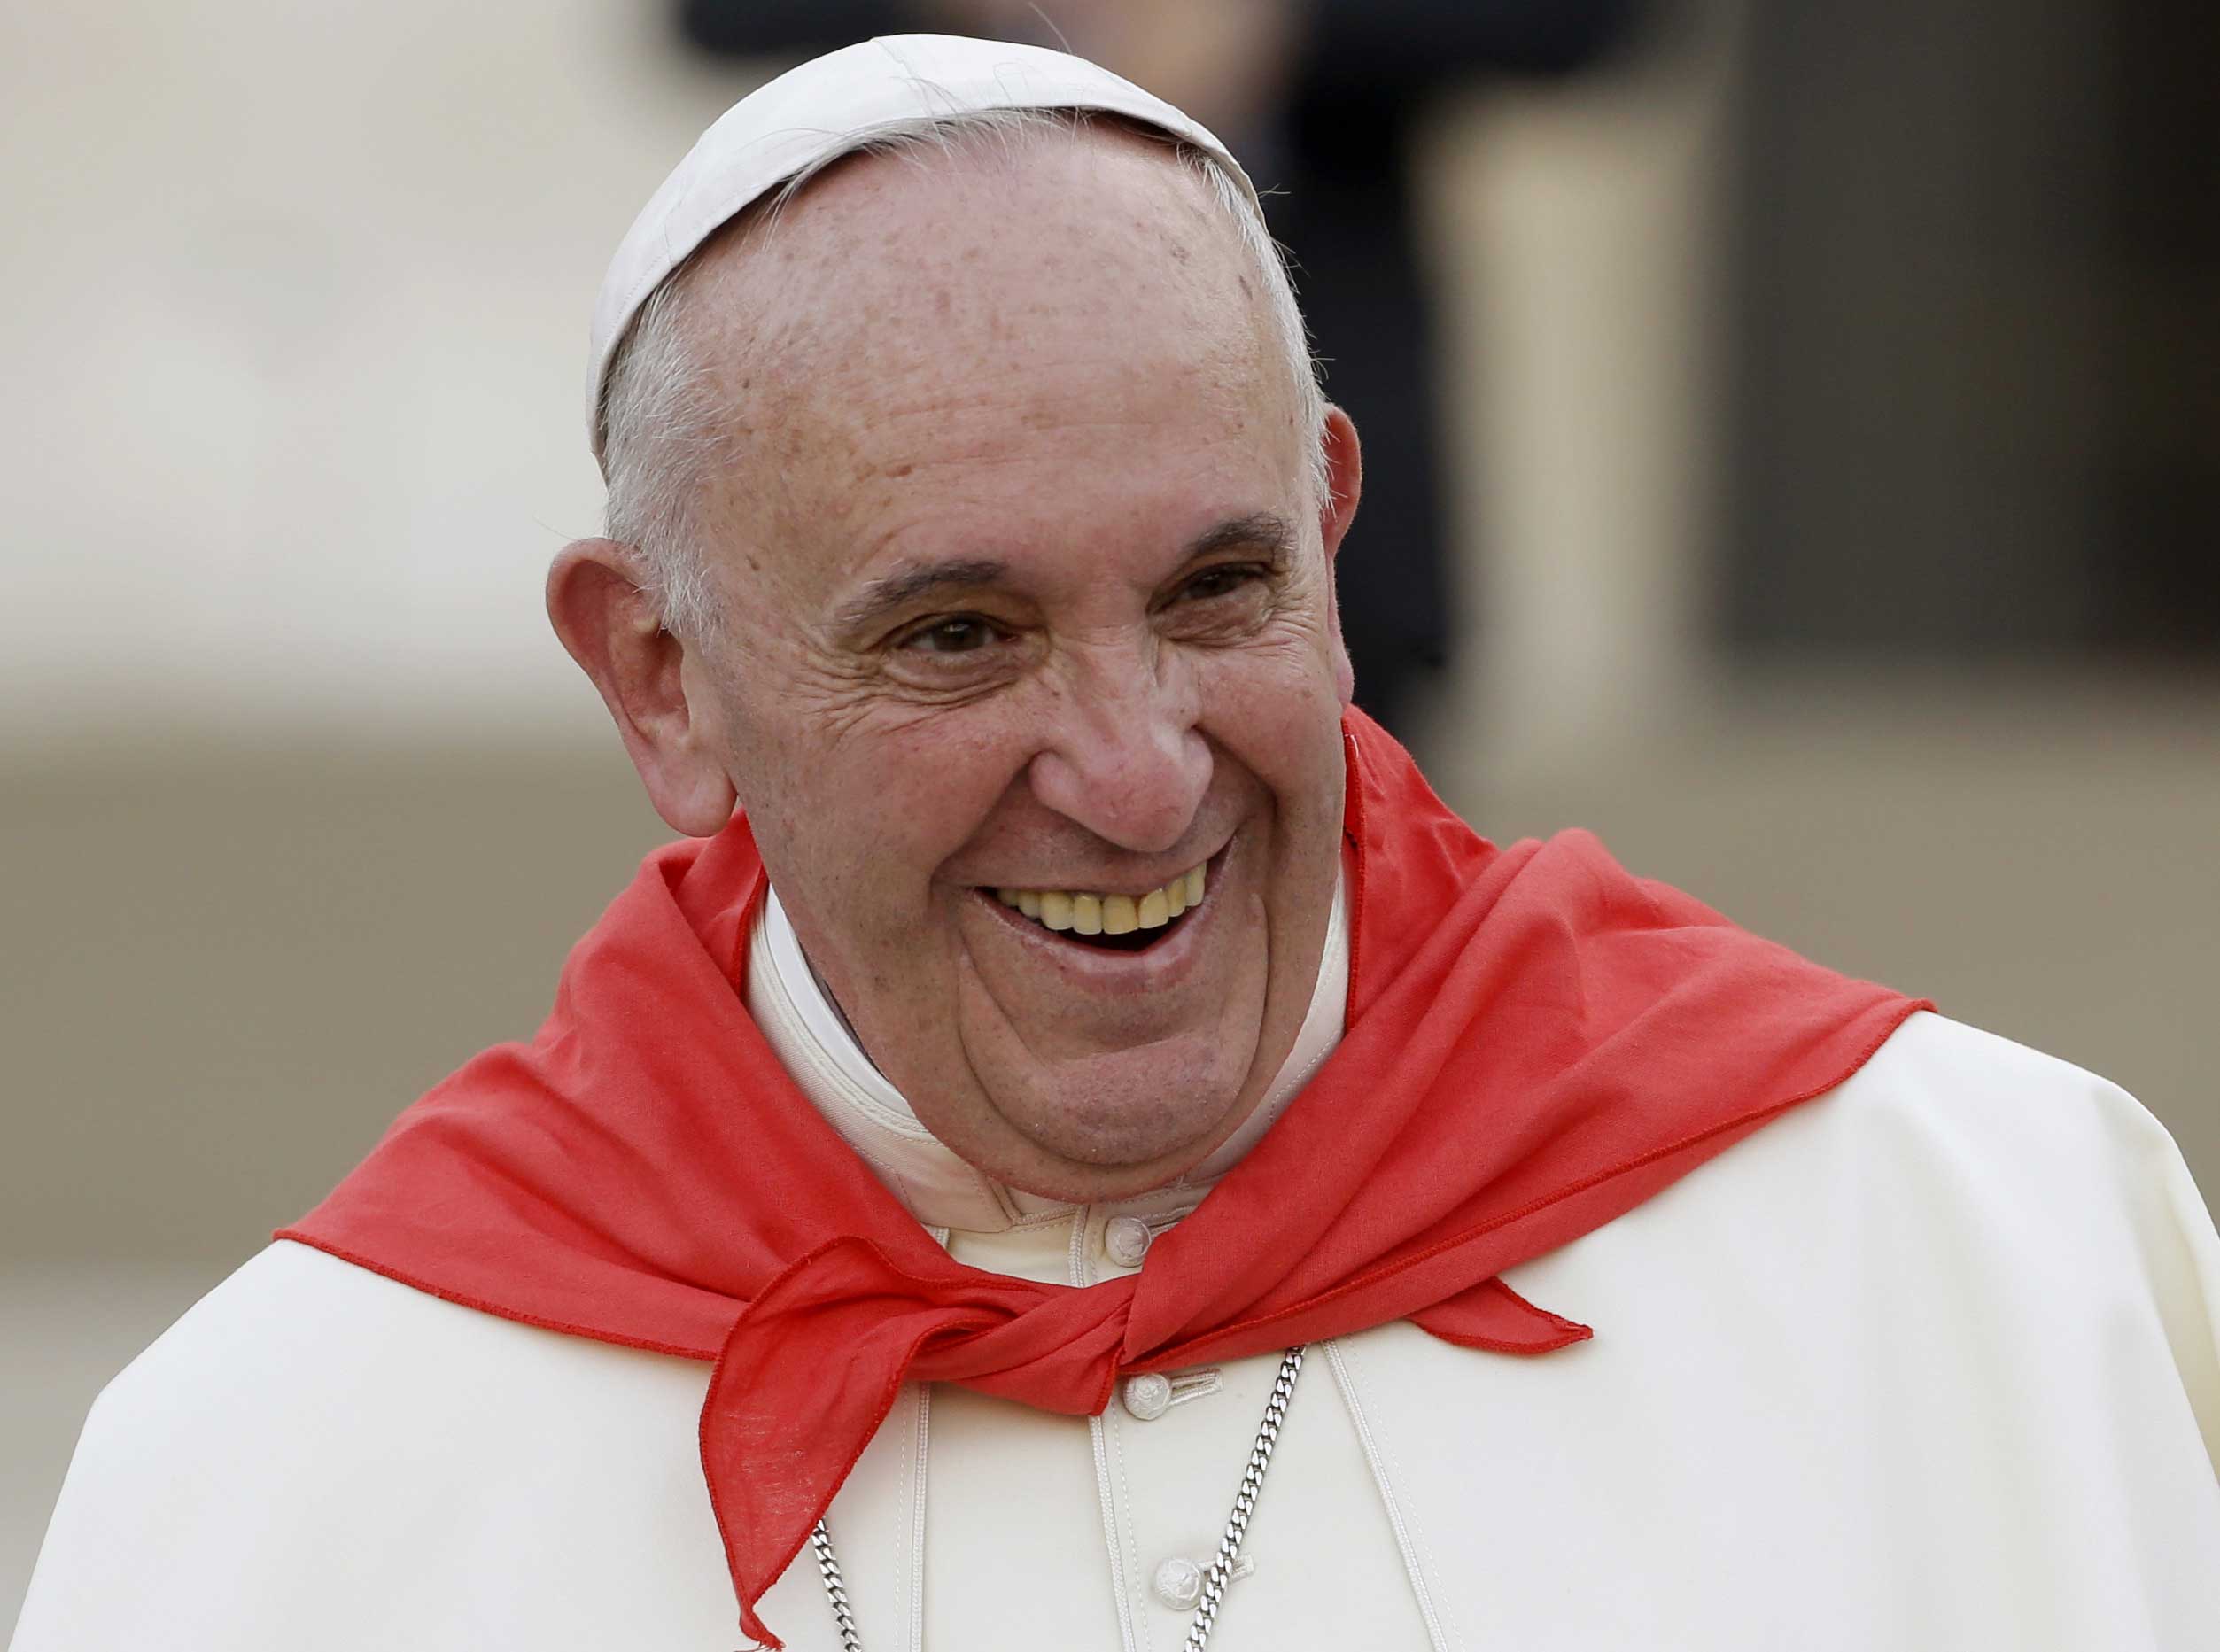 Pope Francis, wearing a red scarf, has a light moment as he leaves St. Peter's Square at the Vatican after an audience with with Altar boys and girls, Aug. 4, 2015. (Gregorio Borgia—AP)